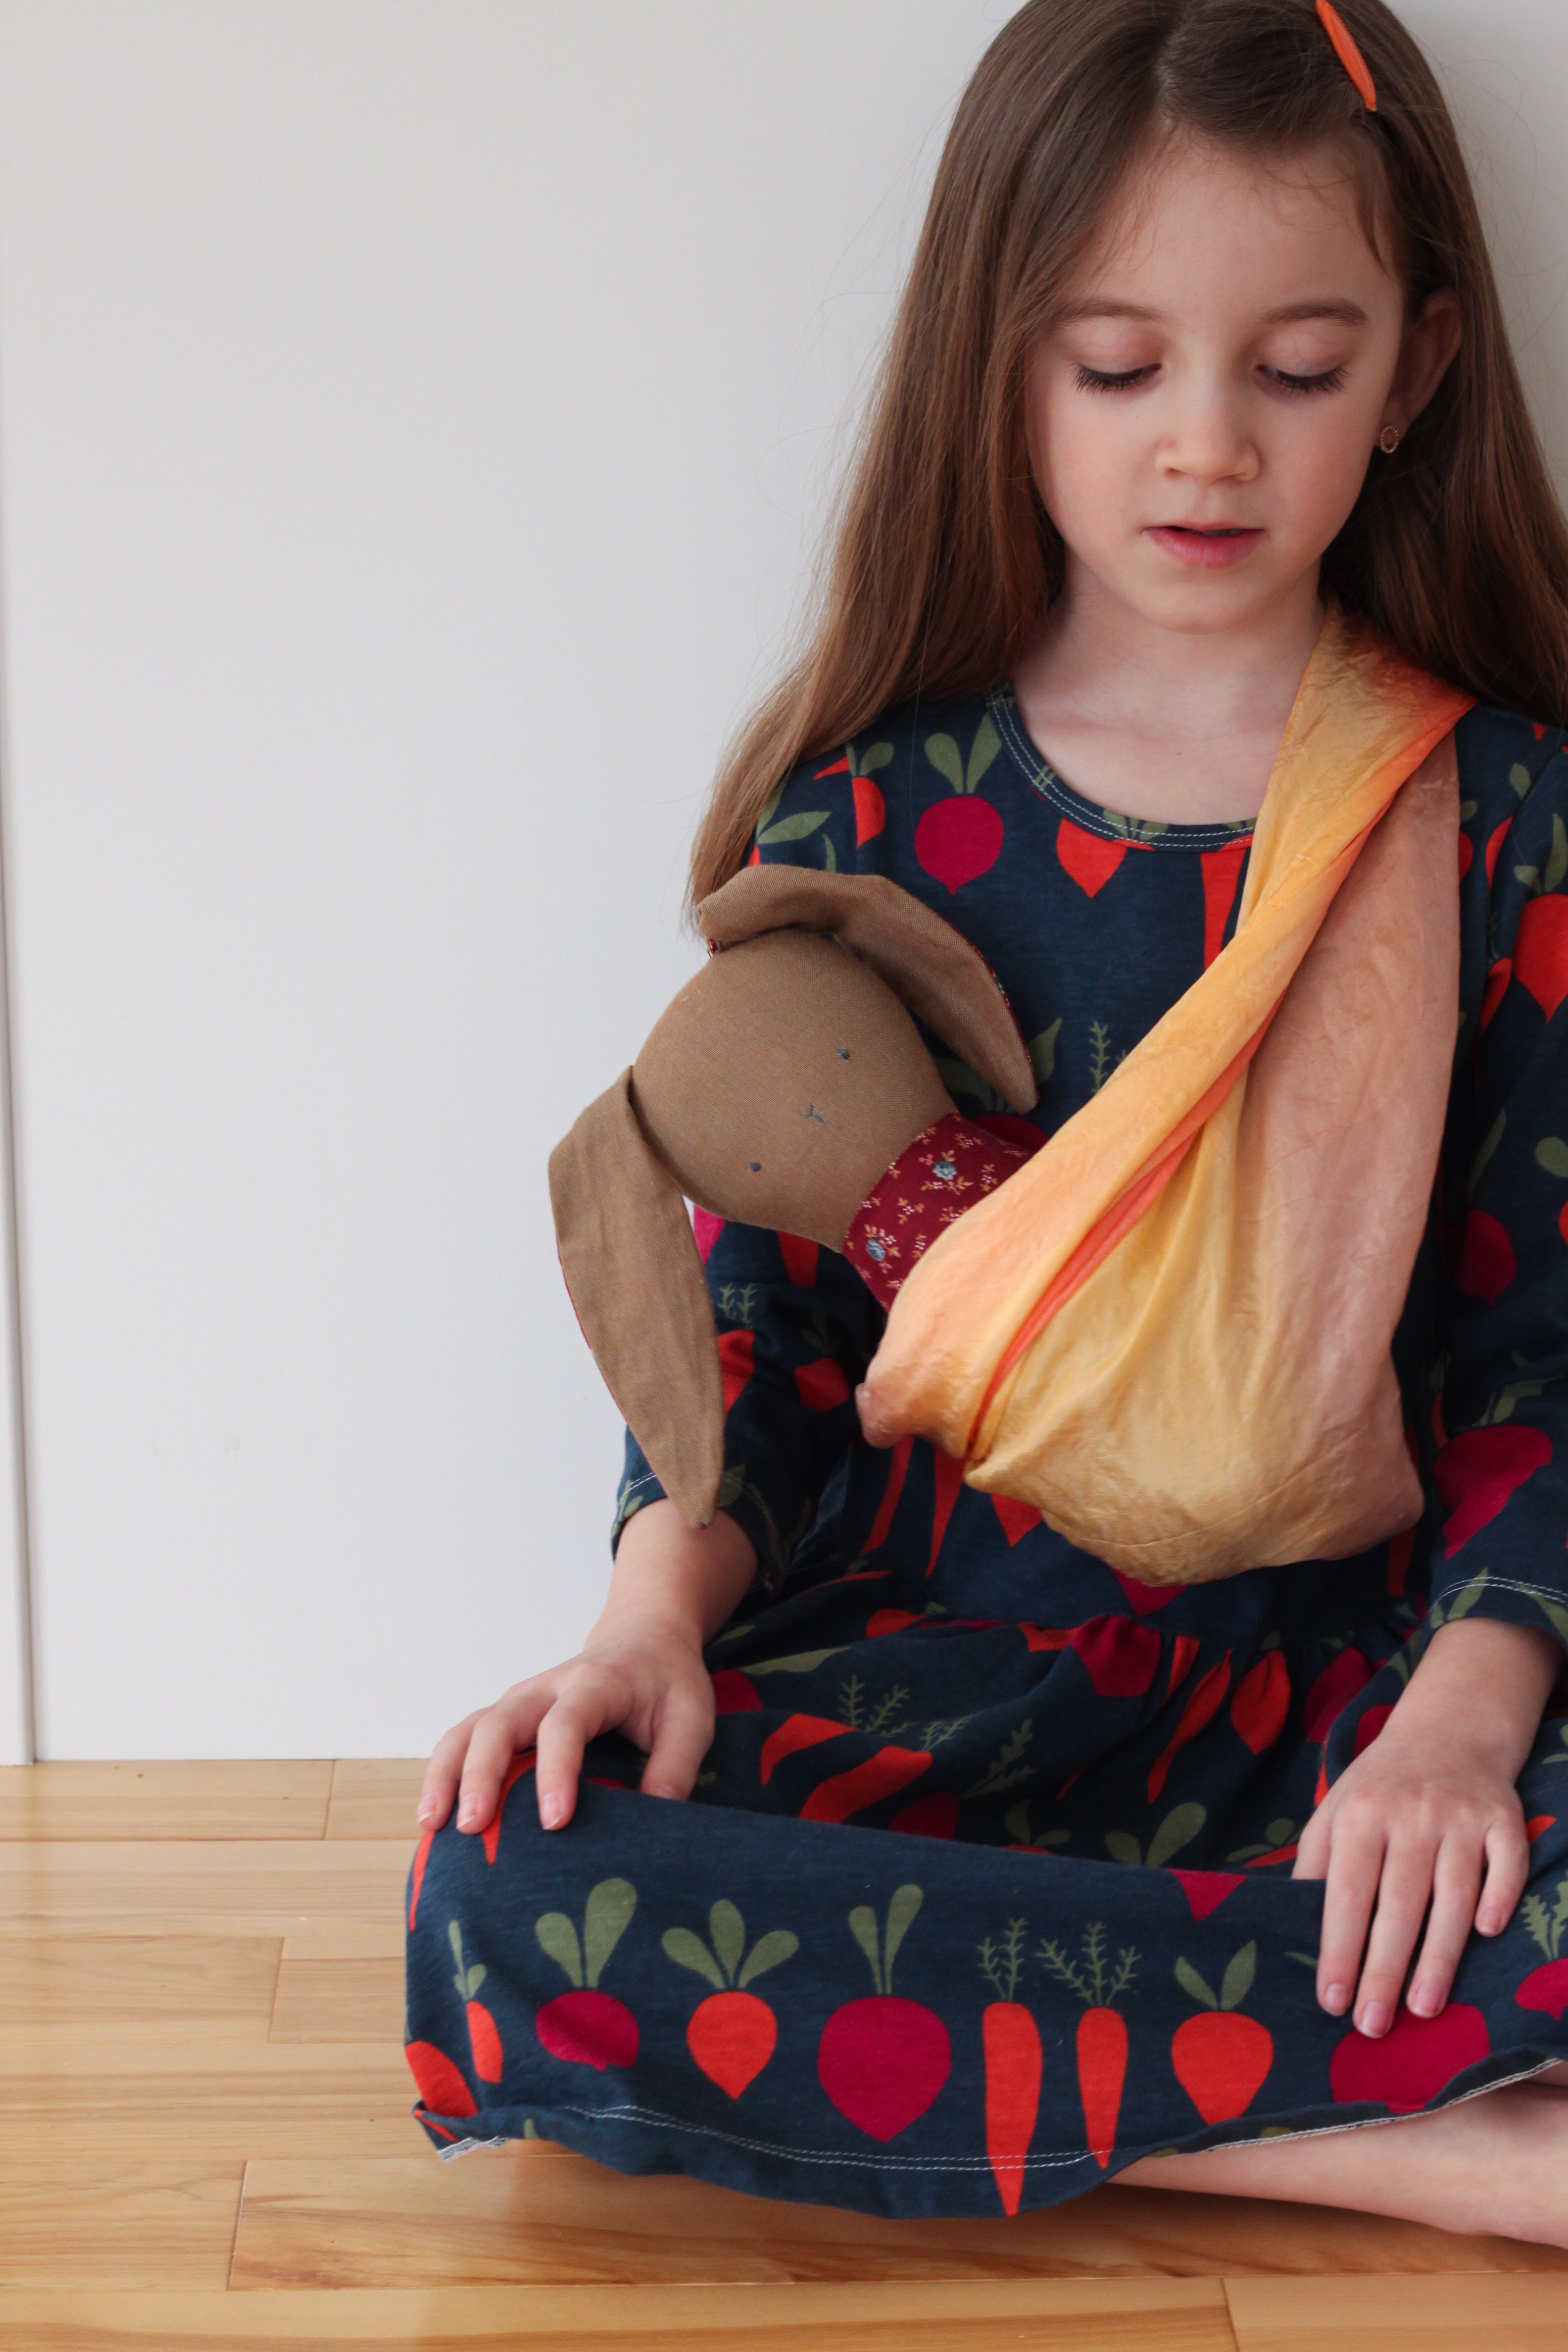 Sue's daughter is wearing a navy blue dress with orange carrots and red beets pattern. She is wearing an orange-coloured silk as a baby sling with a brown heirloom bunny doll tucked inside.